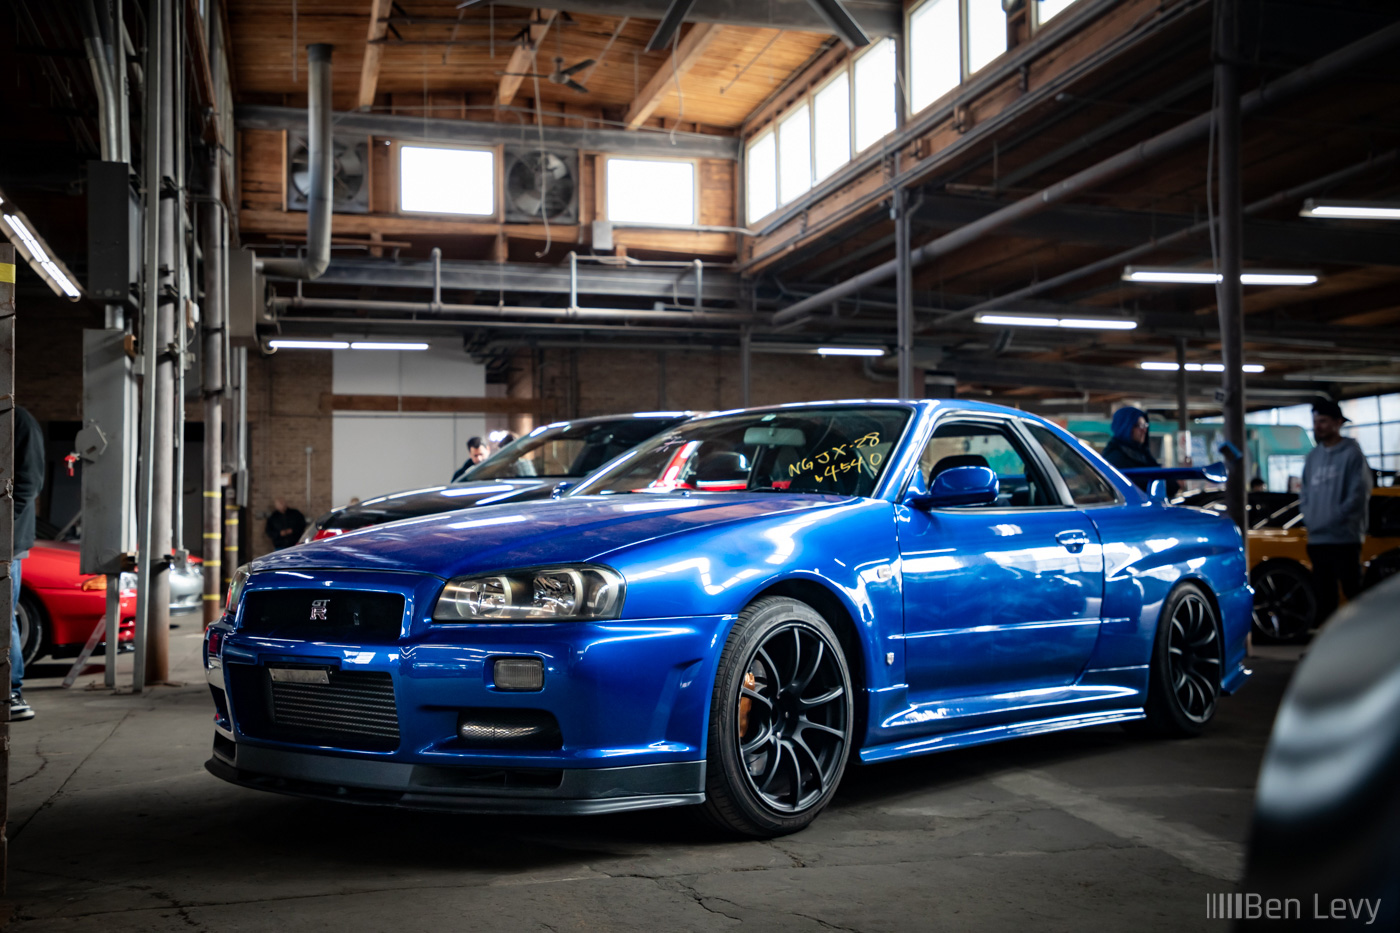 Newly Imported Bayside Blue R34 Skyline at Cars and Coffee in Chicago